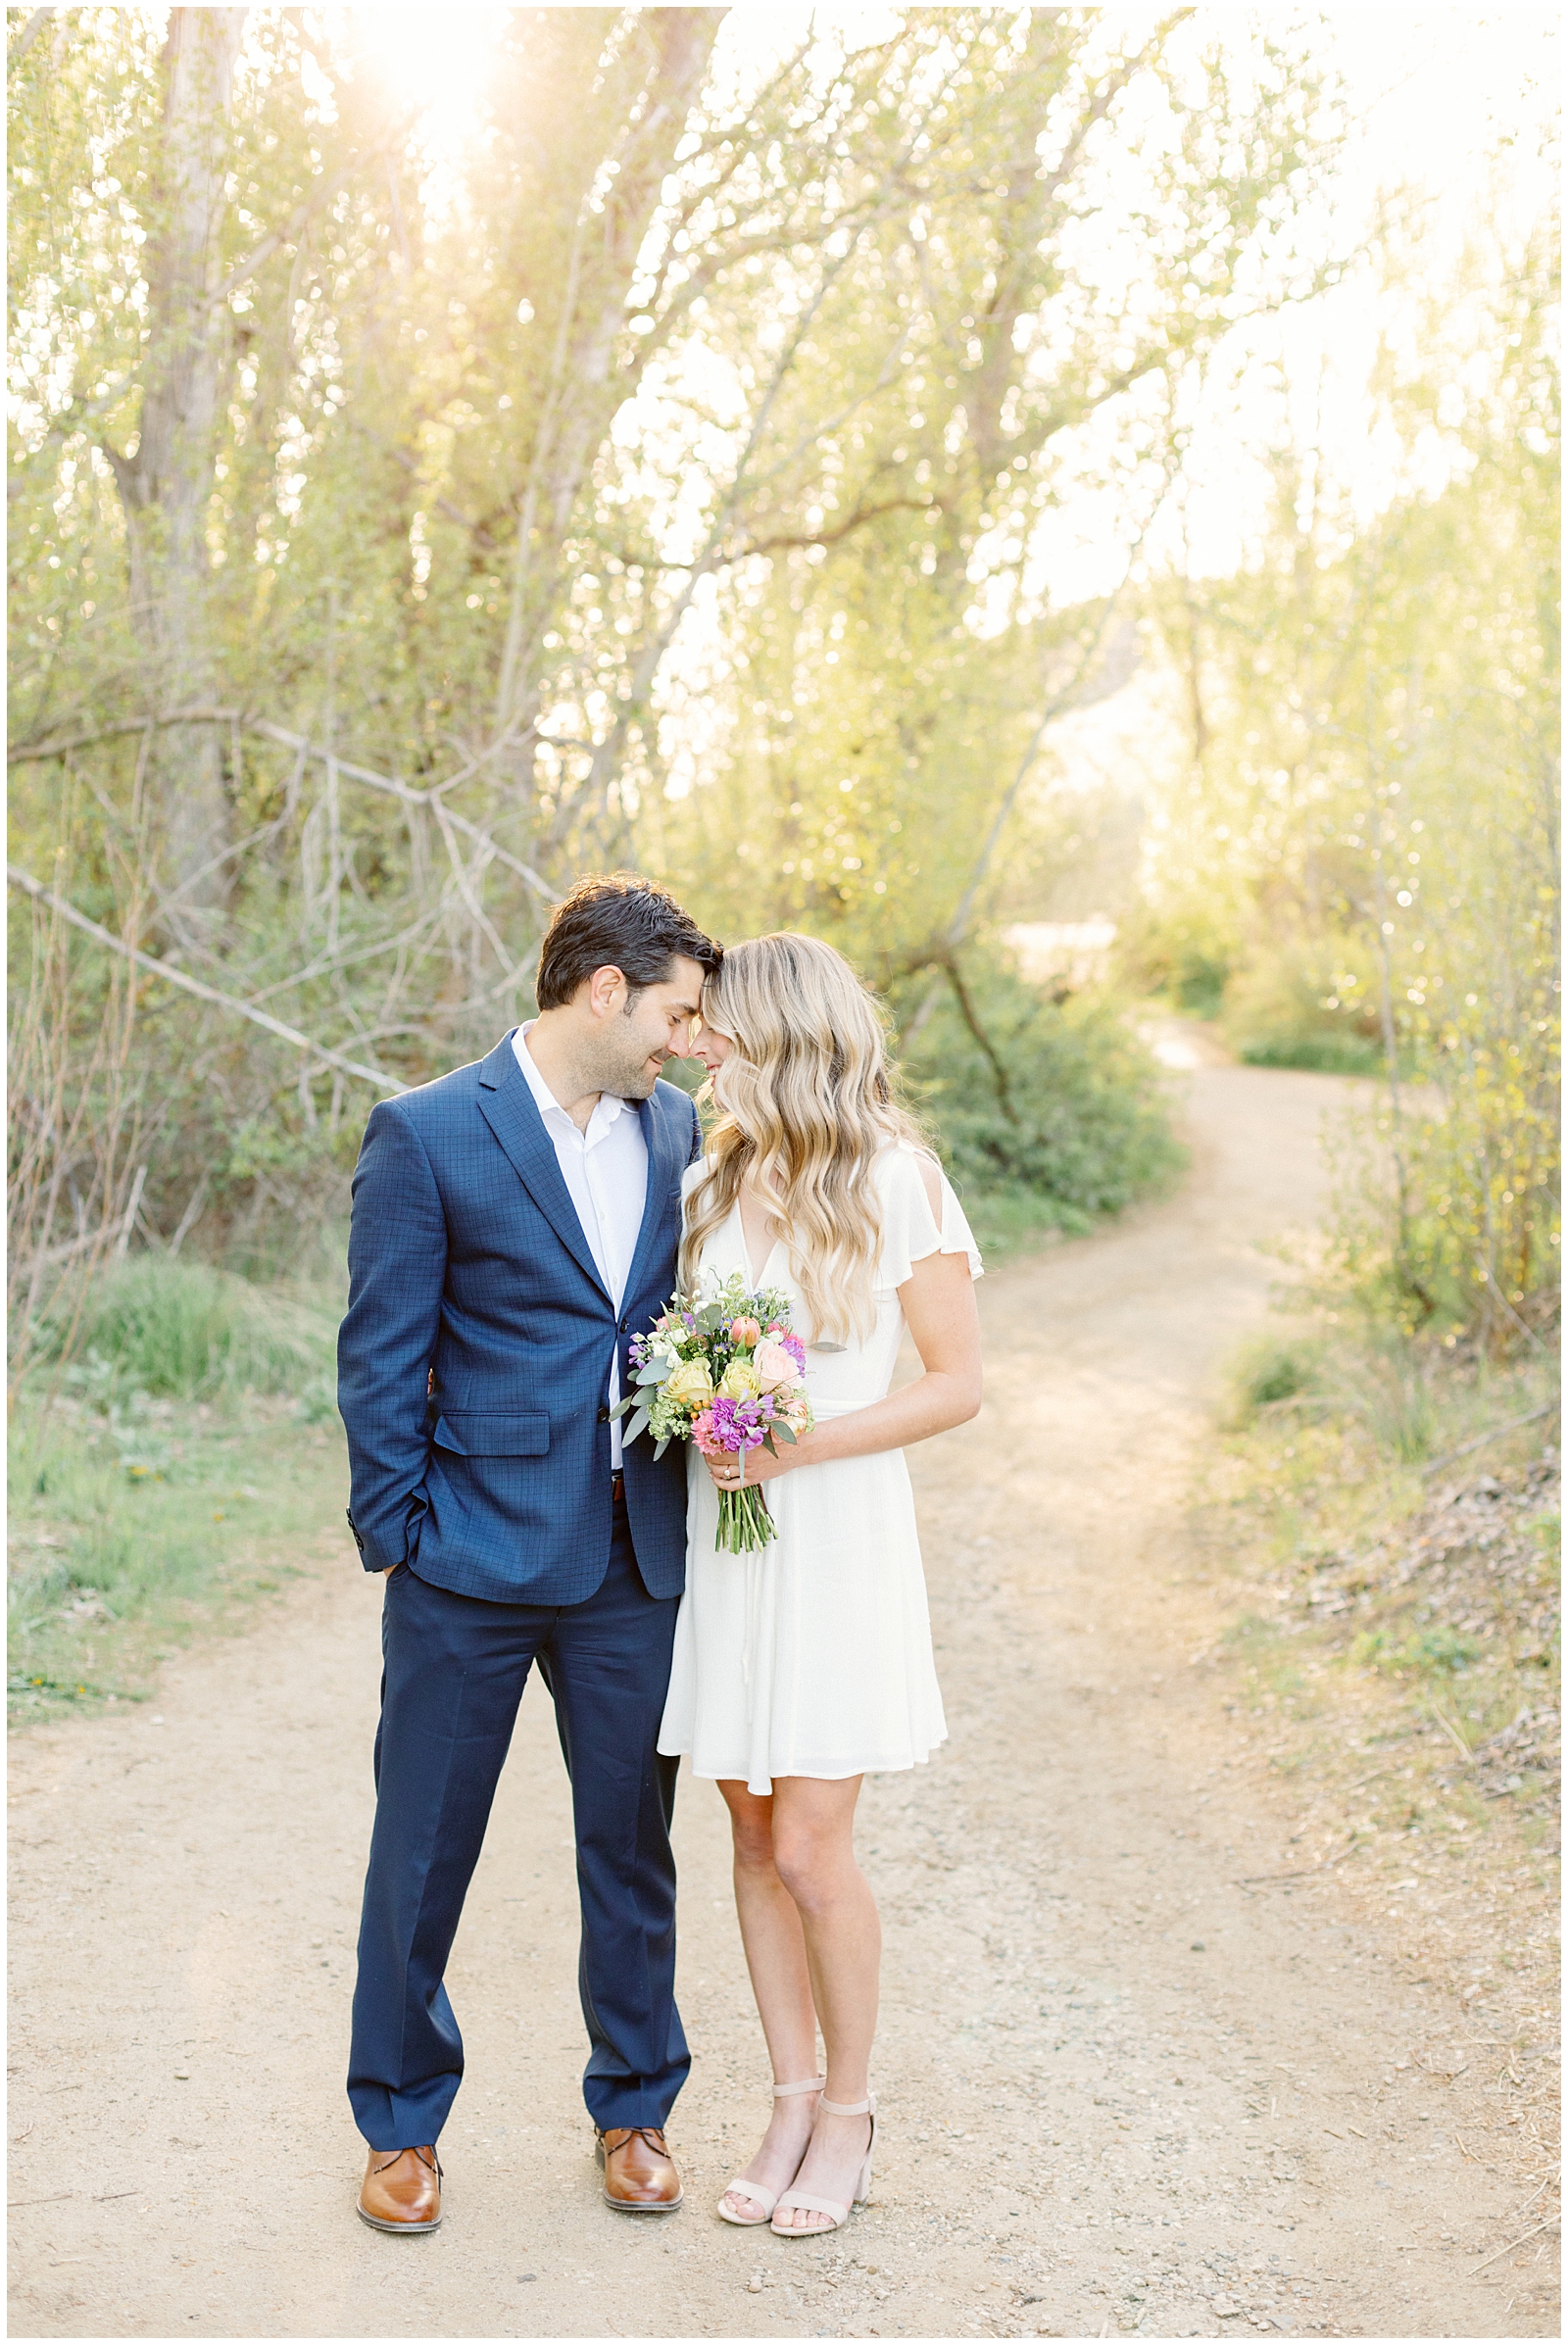 Dreamy Elegant Boise Foothills Engagement Session - Groom in Navy Plaid Suit and Bride in White Dress with Fresh Flowers